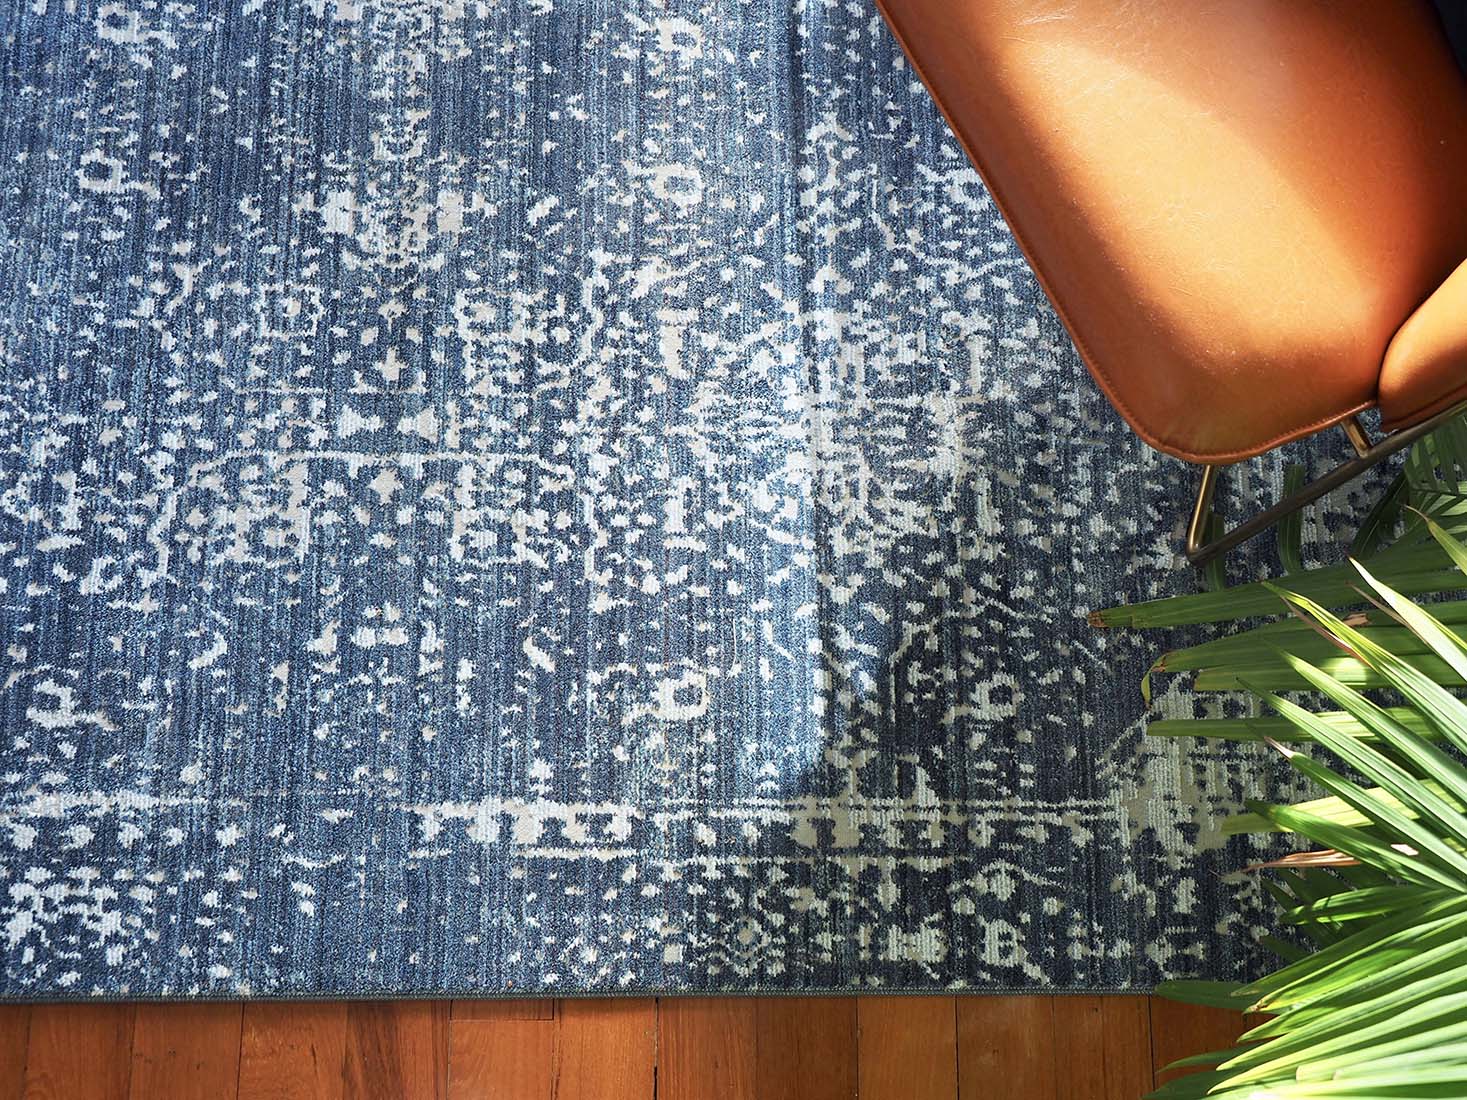 Persian style hallway runner in navy and grey